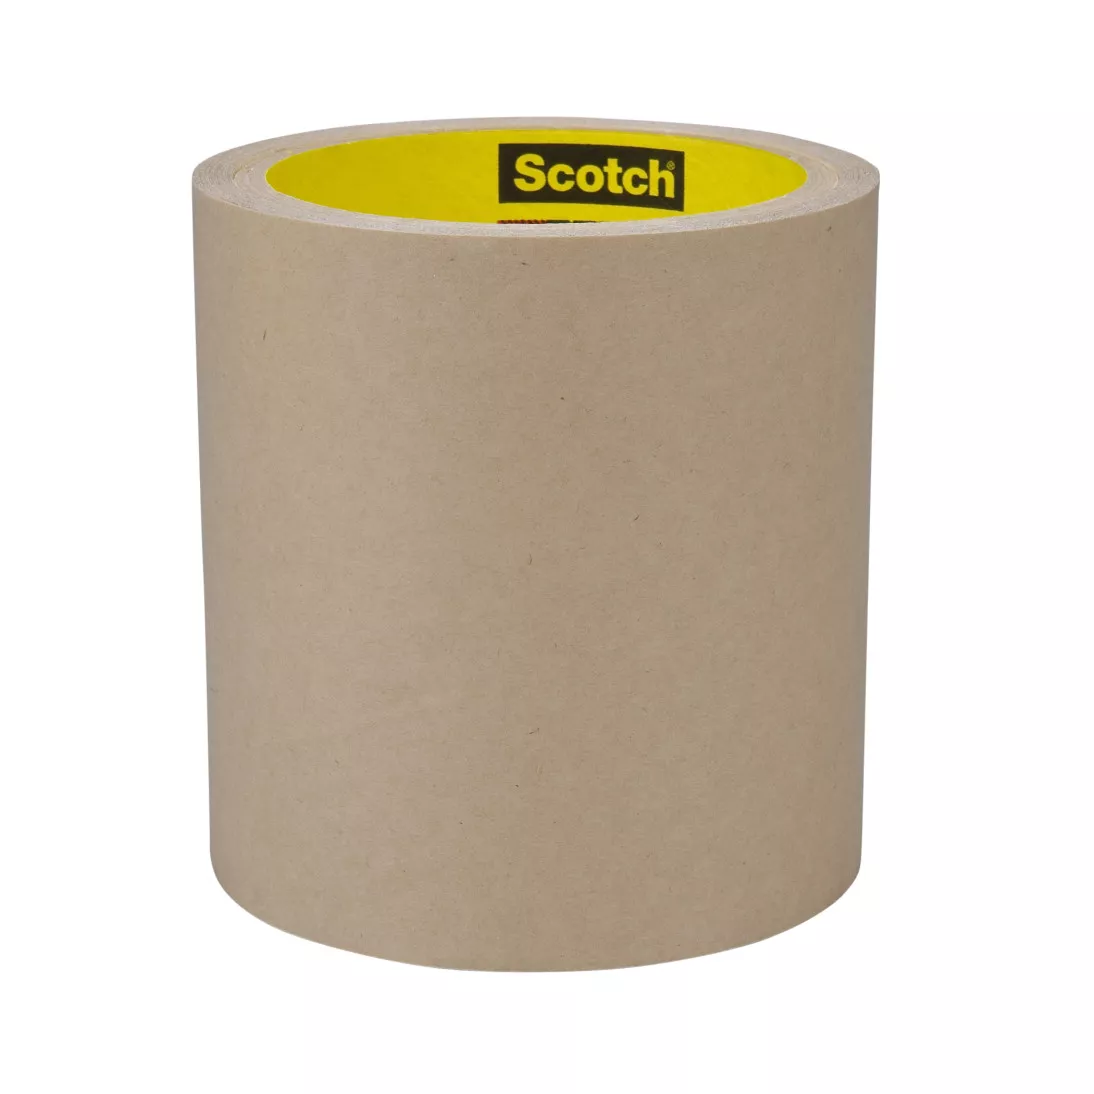 3M™ Adhesive Transfer Tape 9482PC, Clear, 3/4 in x 180 yd, 2 mil, 12
rolls per case